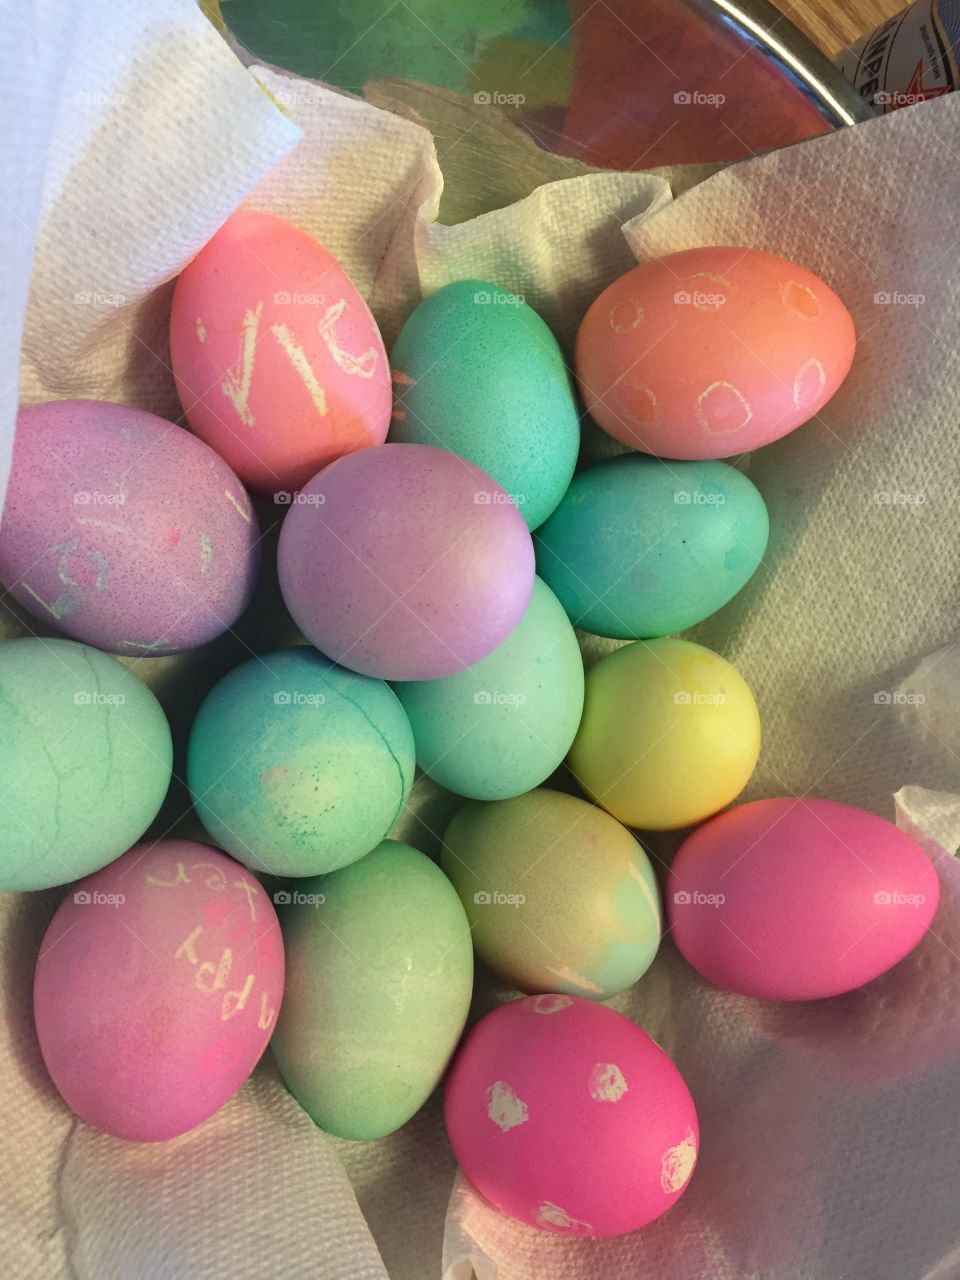 Spent Easter vacationing on the West Coast. Remembered to bring the dye kit and the eggs for the egg decorating but forgot the vinegar. No worry it seems Fresca makes a suitable, if not superior, substitution!